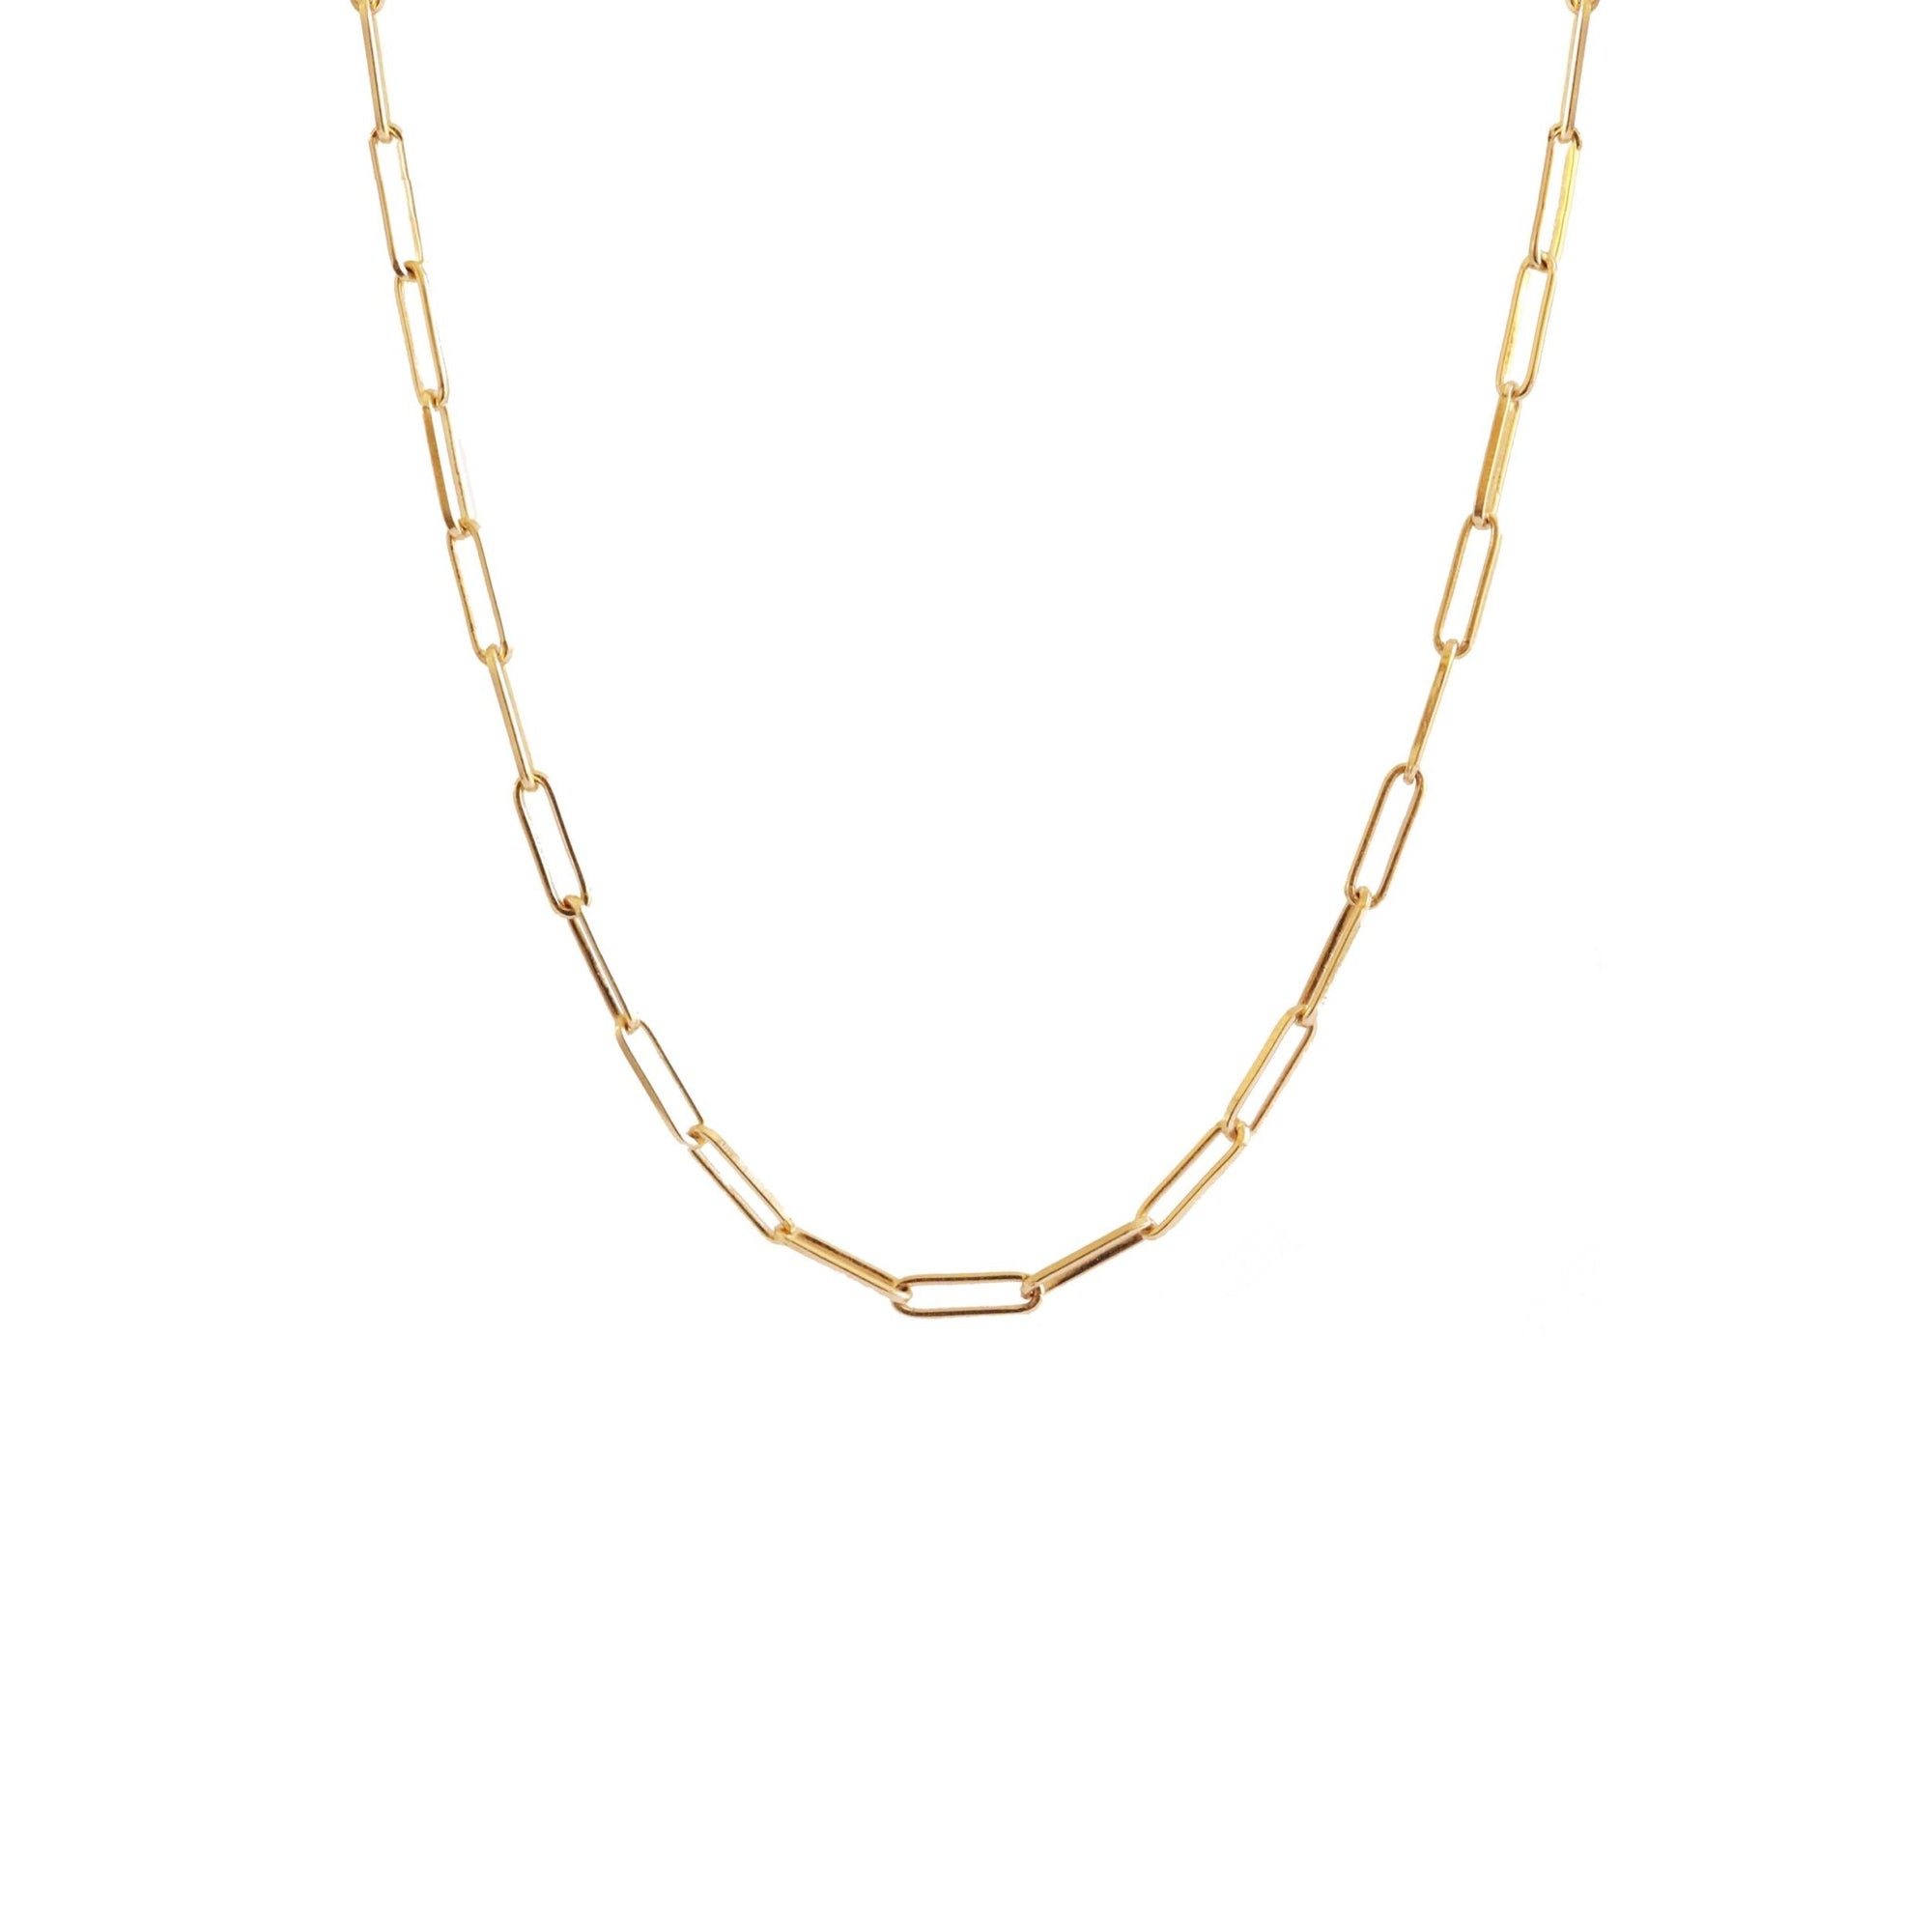 POISE SHORT OVAL LINK NECKLACE - GOLD 17" - SO PRETTY CARA COTTER